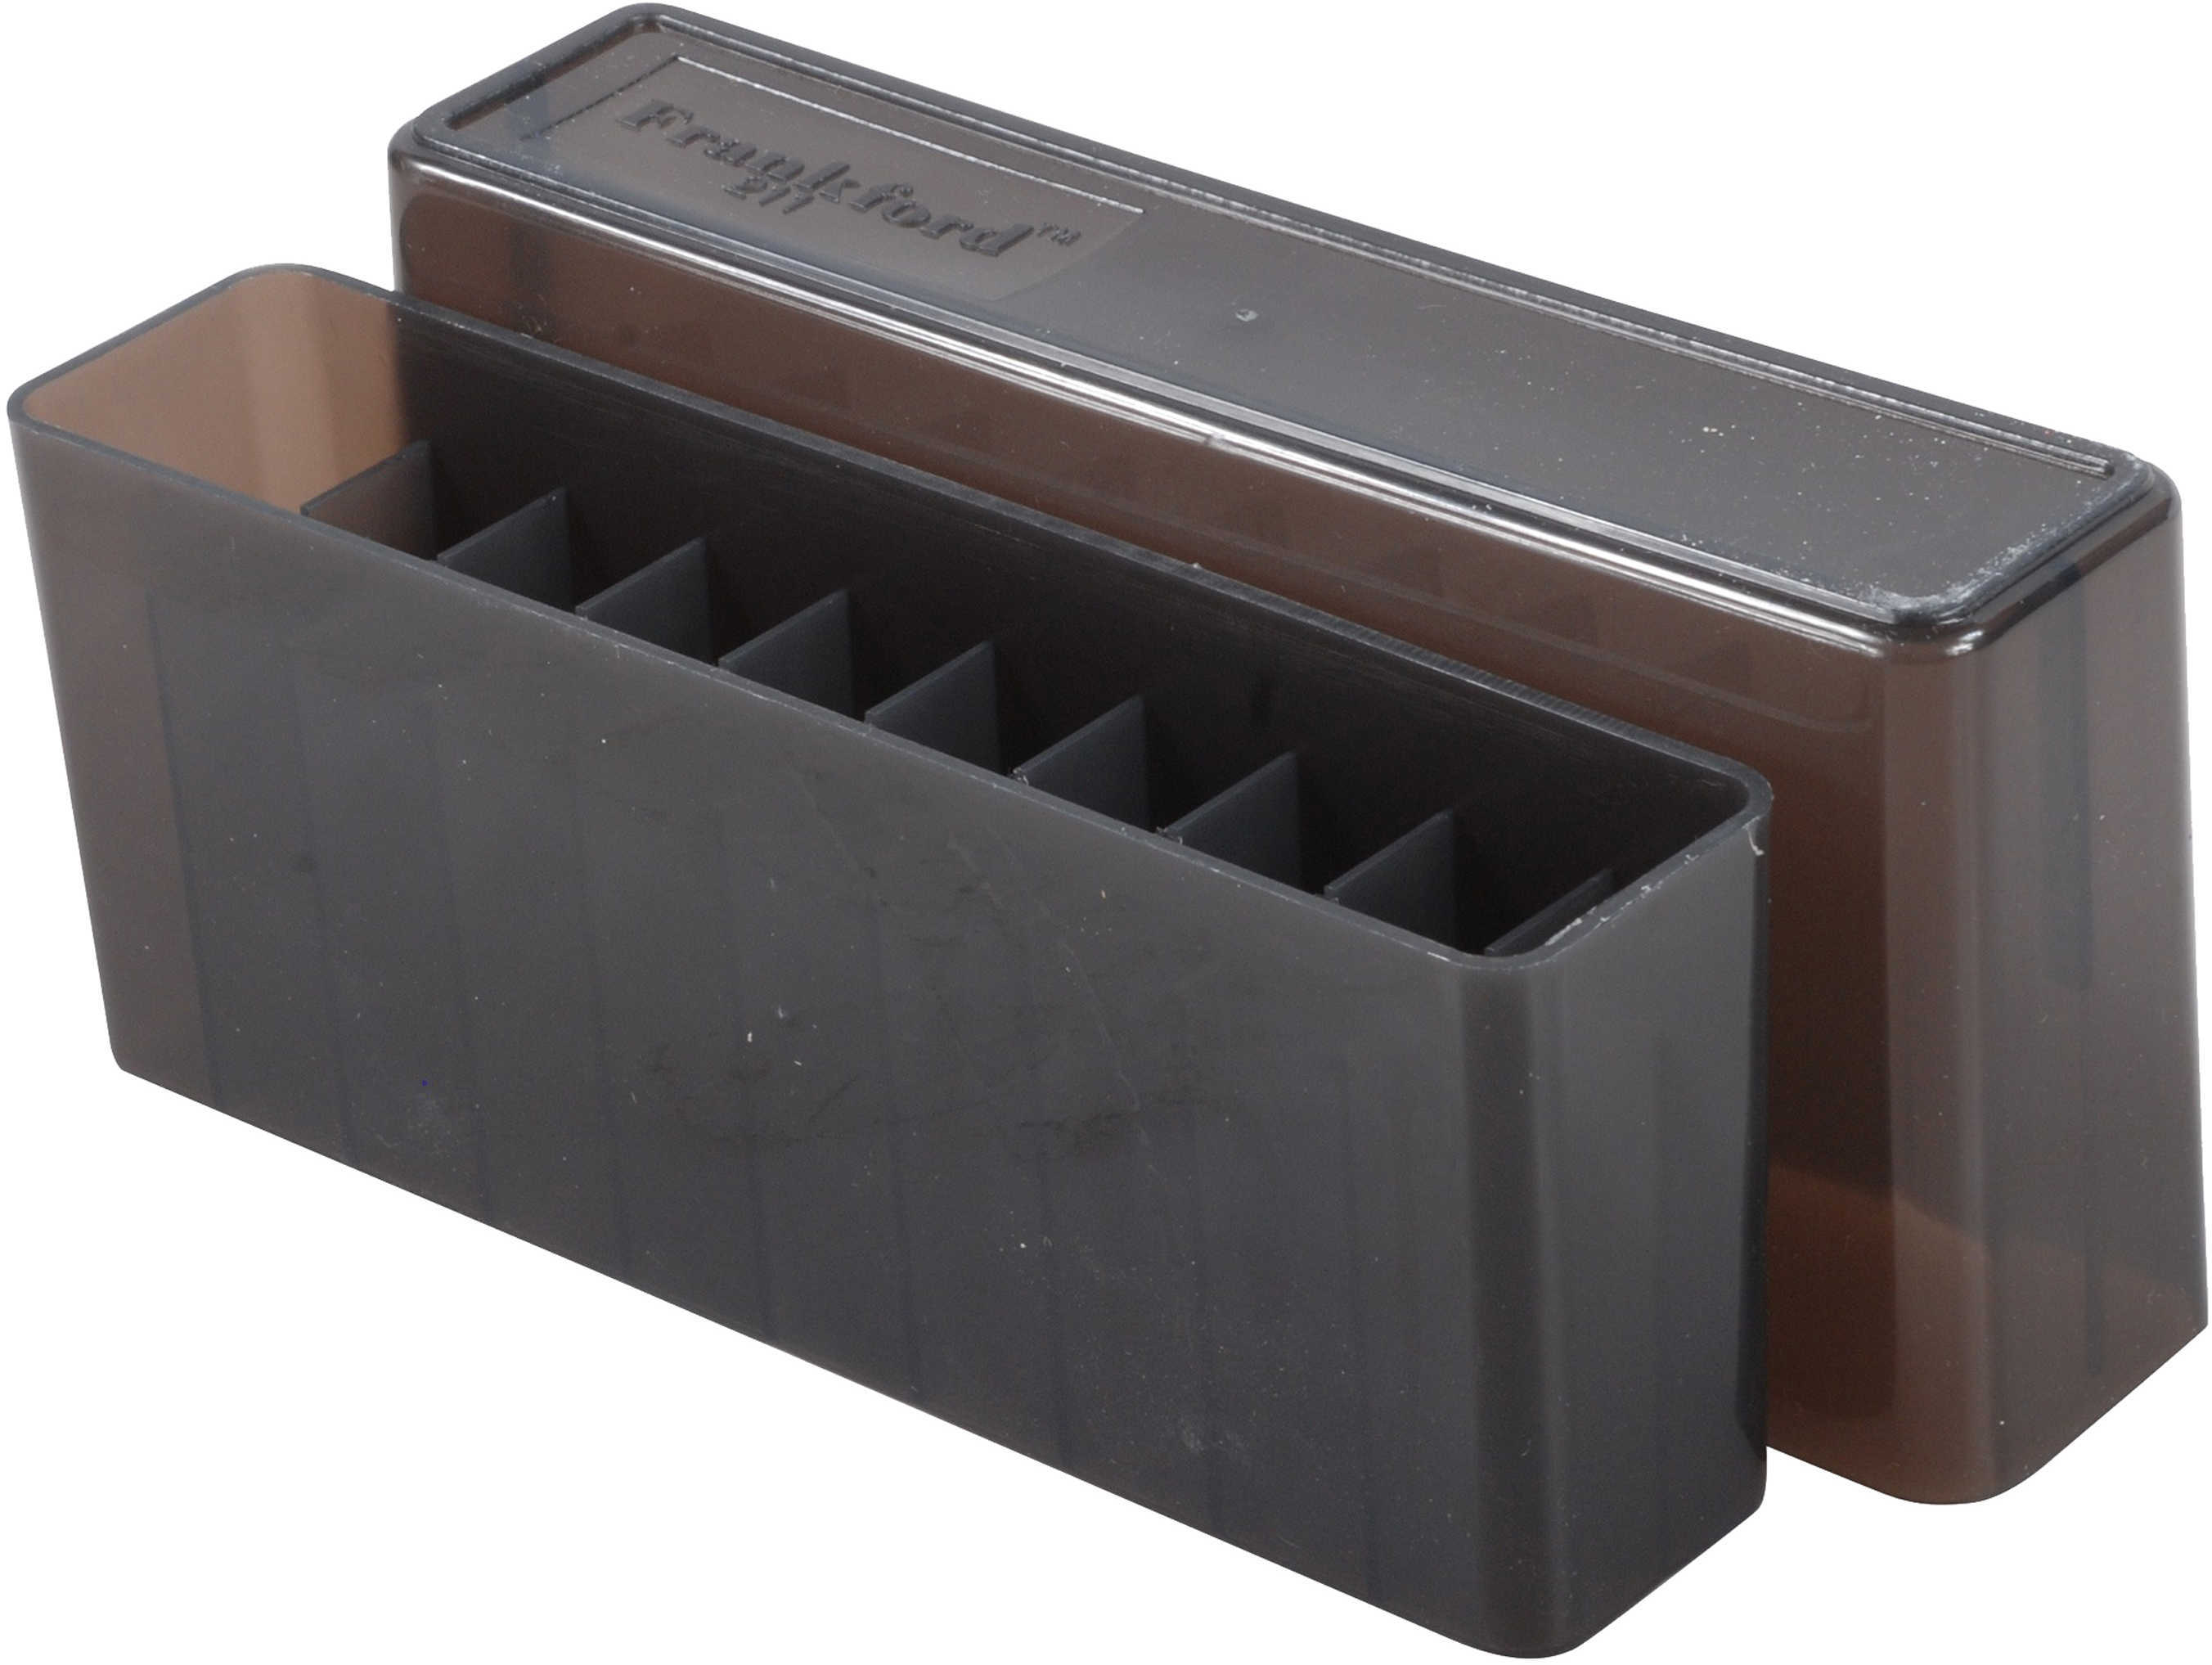 Frankford Arsenal #211, Belted Mag 20 Count Ammunition Box 227289